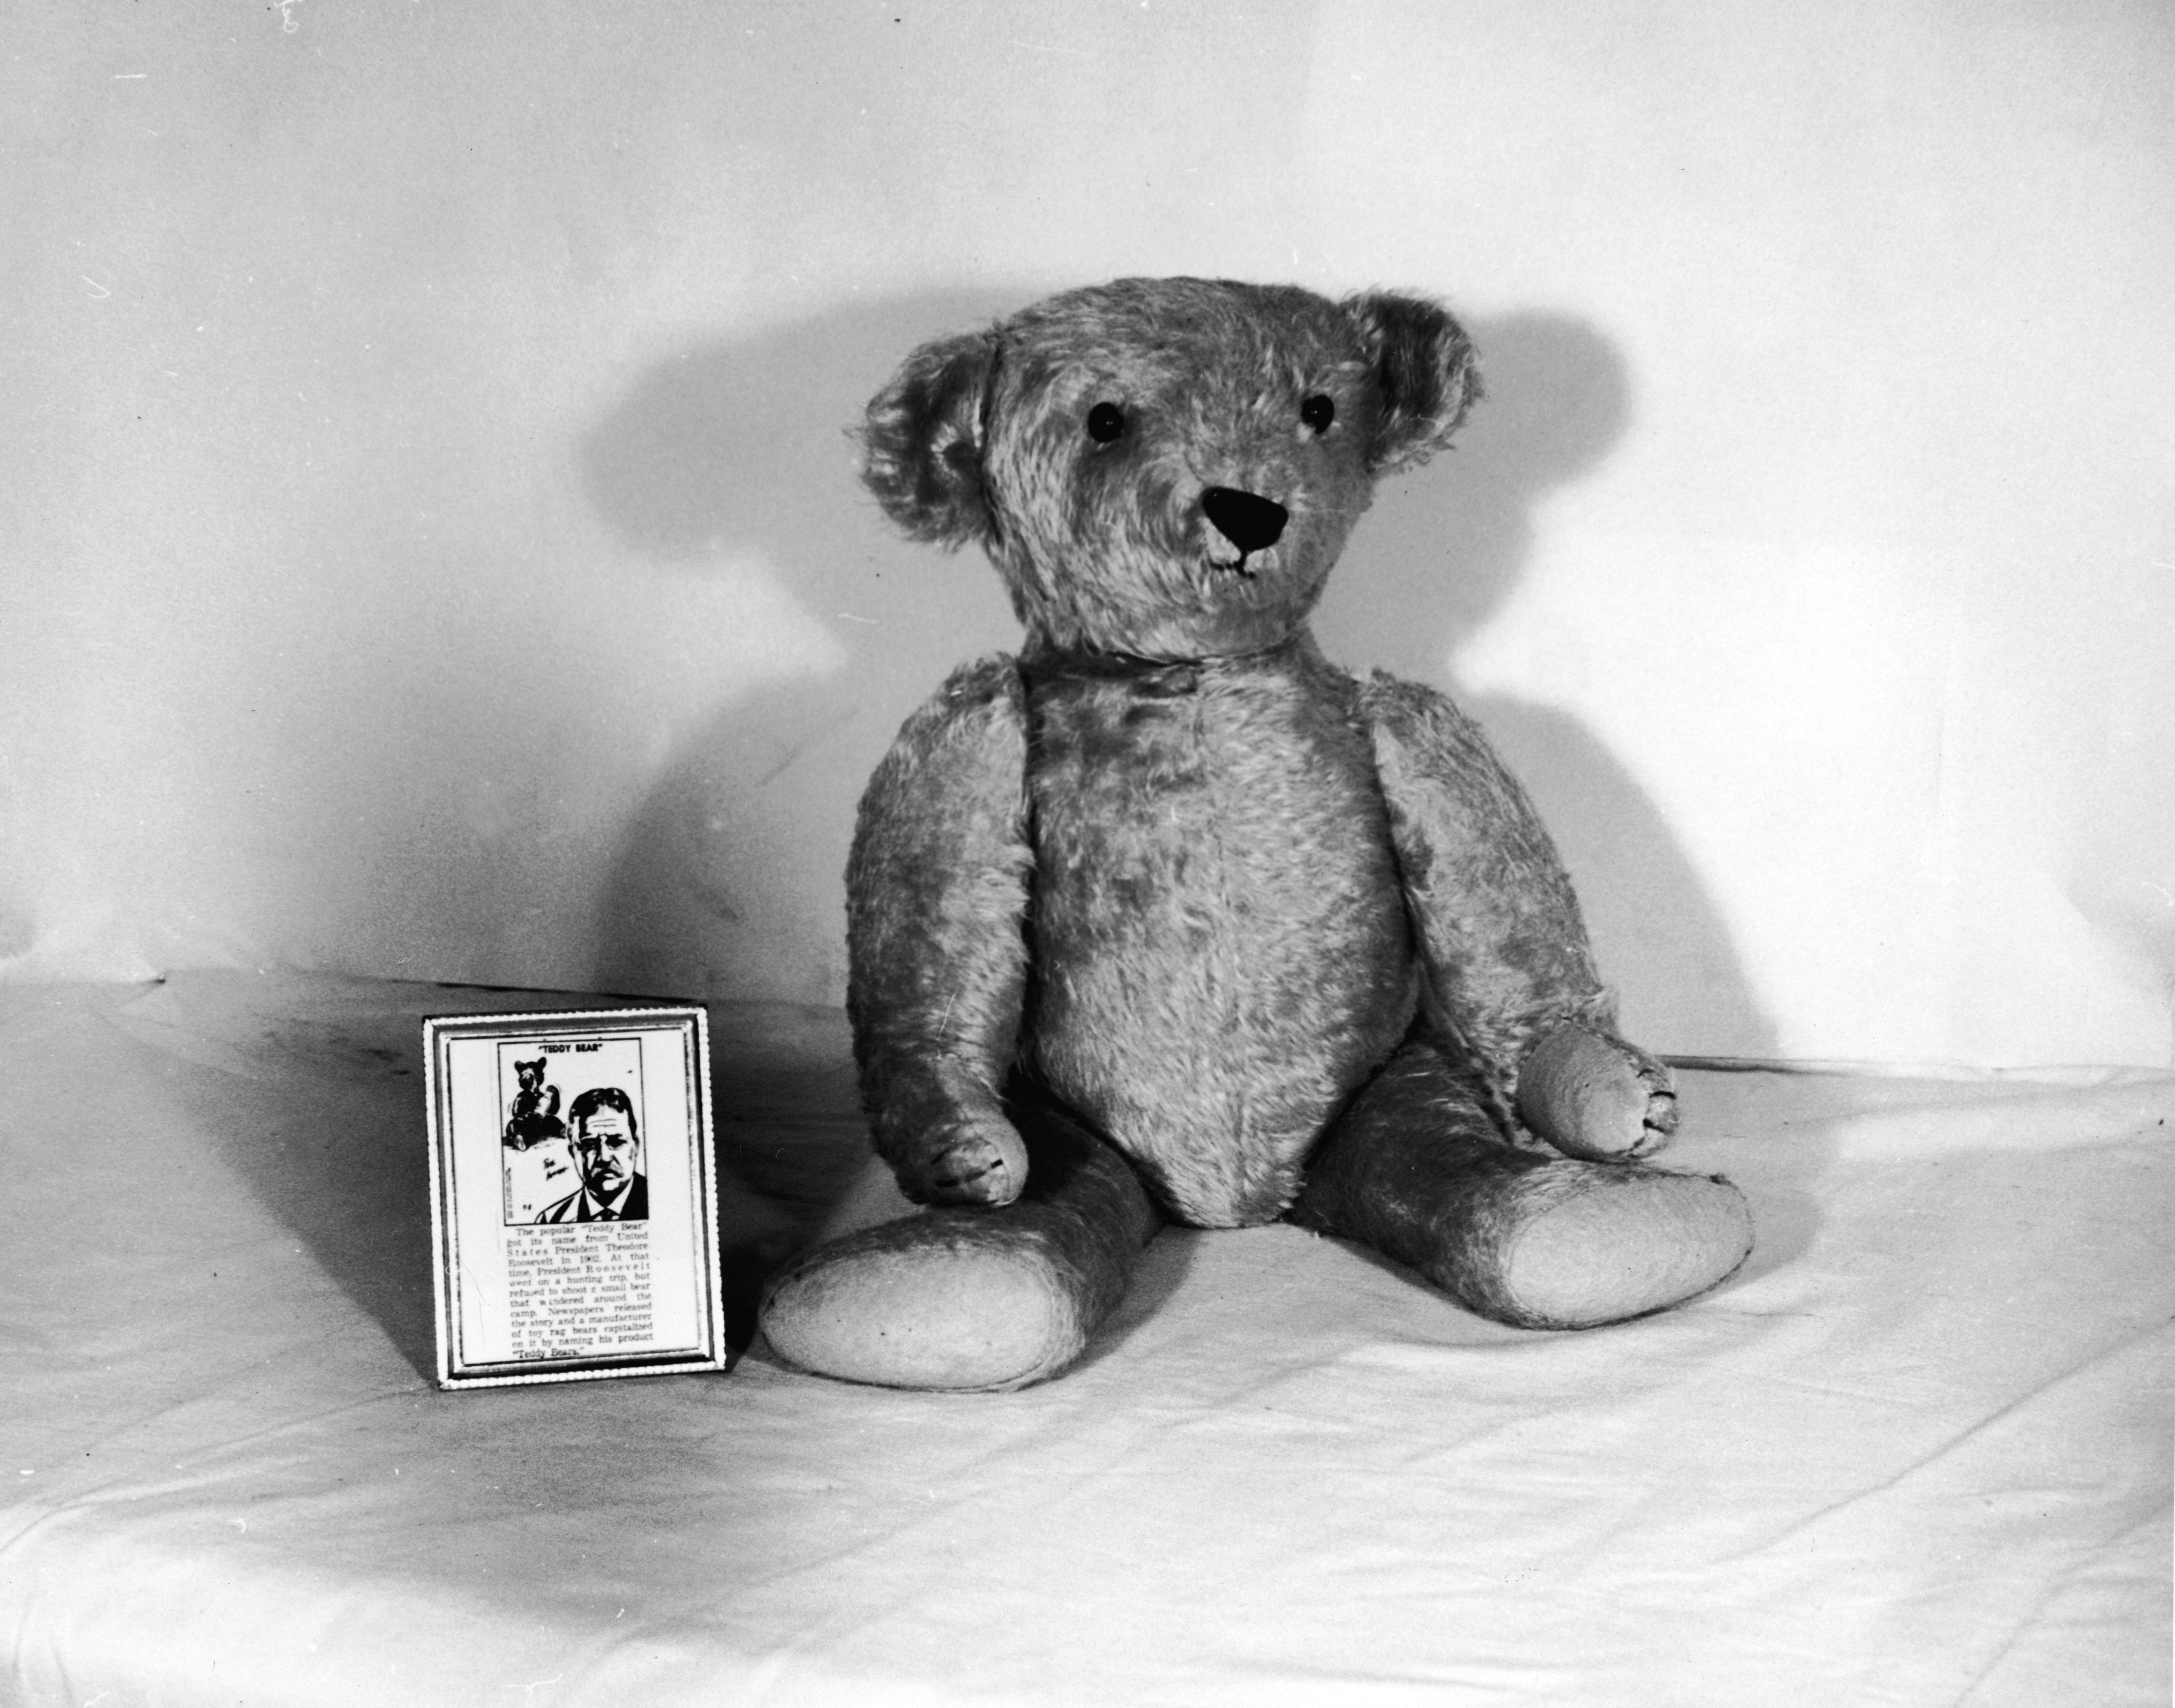 Theodore Roosevelt - History of the Teddy Bear